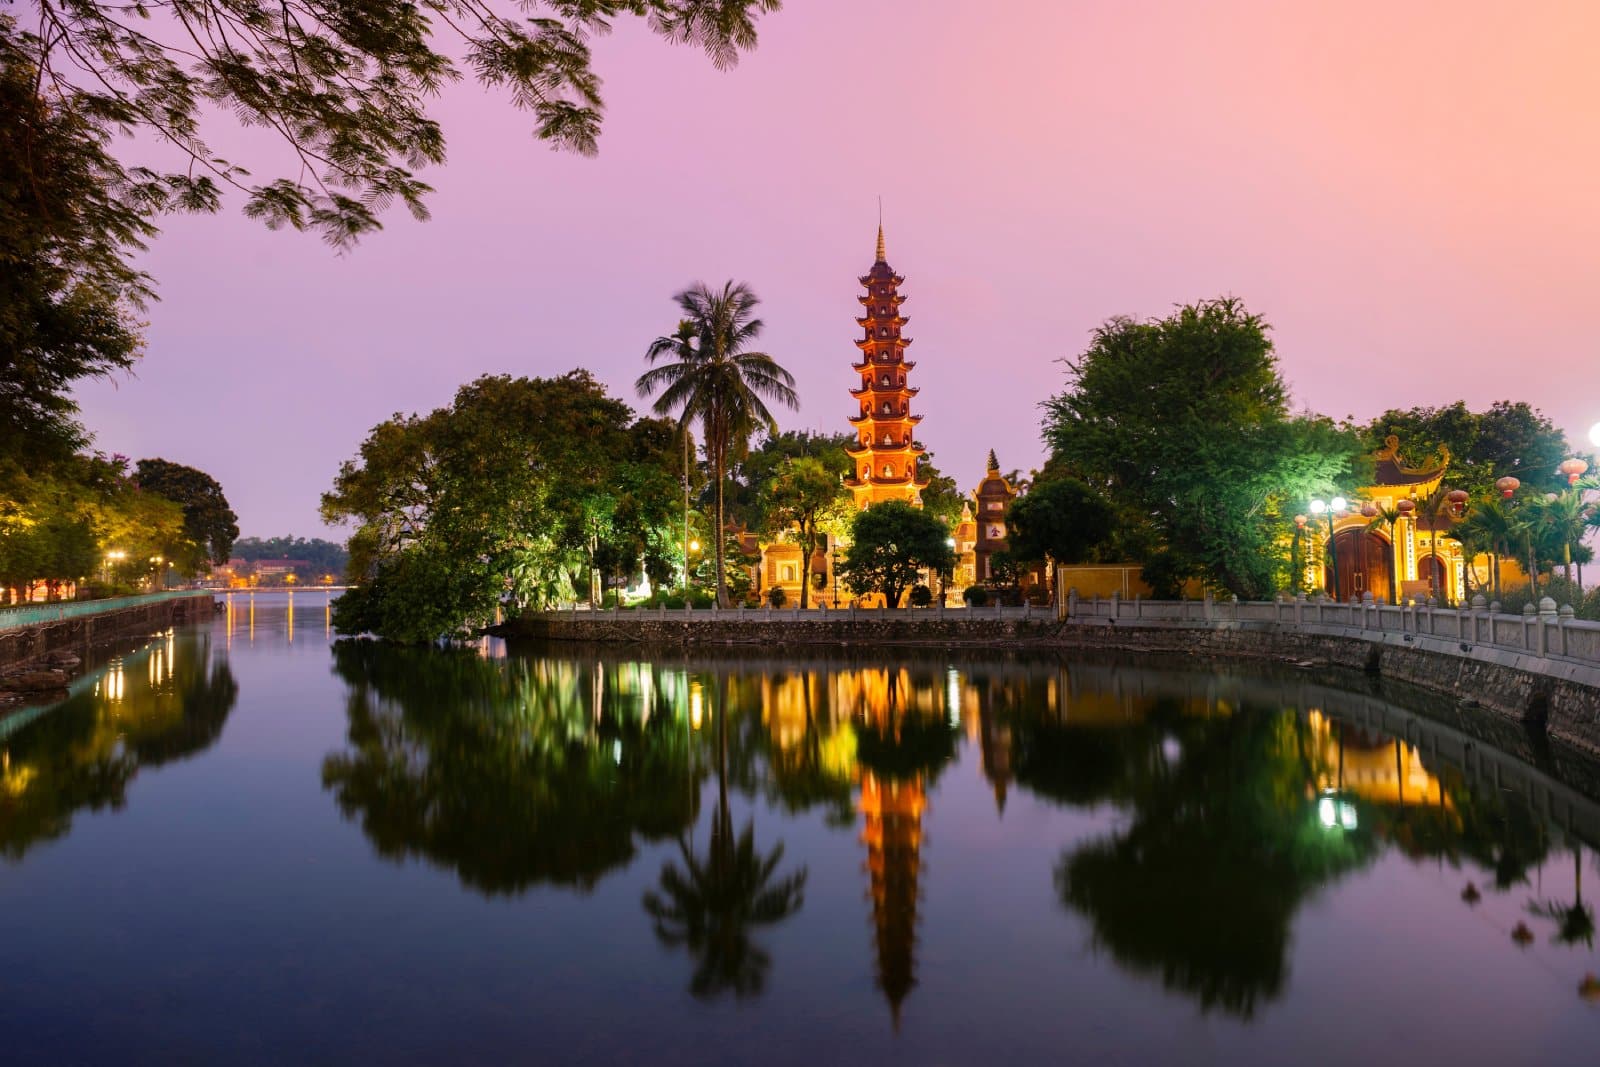 <p>Hanoi, known for its centuries-old architecture, rich culture, and bustling Old Quarter, offers a window into Vietnam’s past and present.</p>